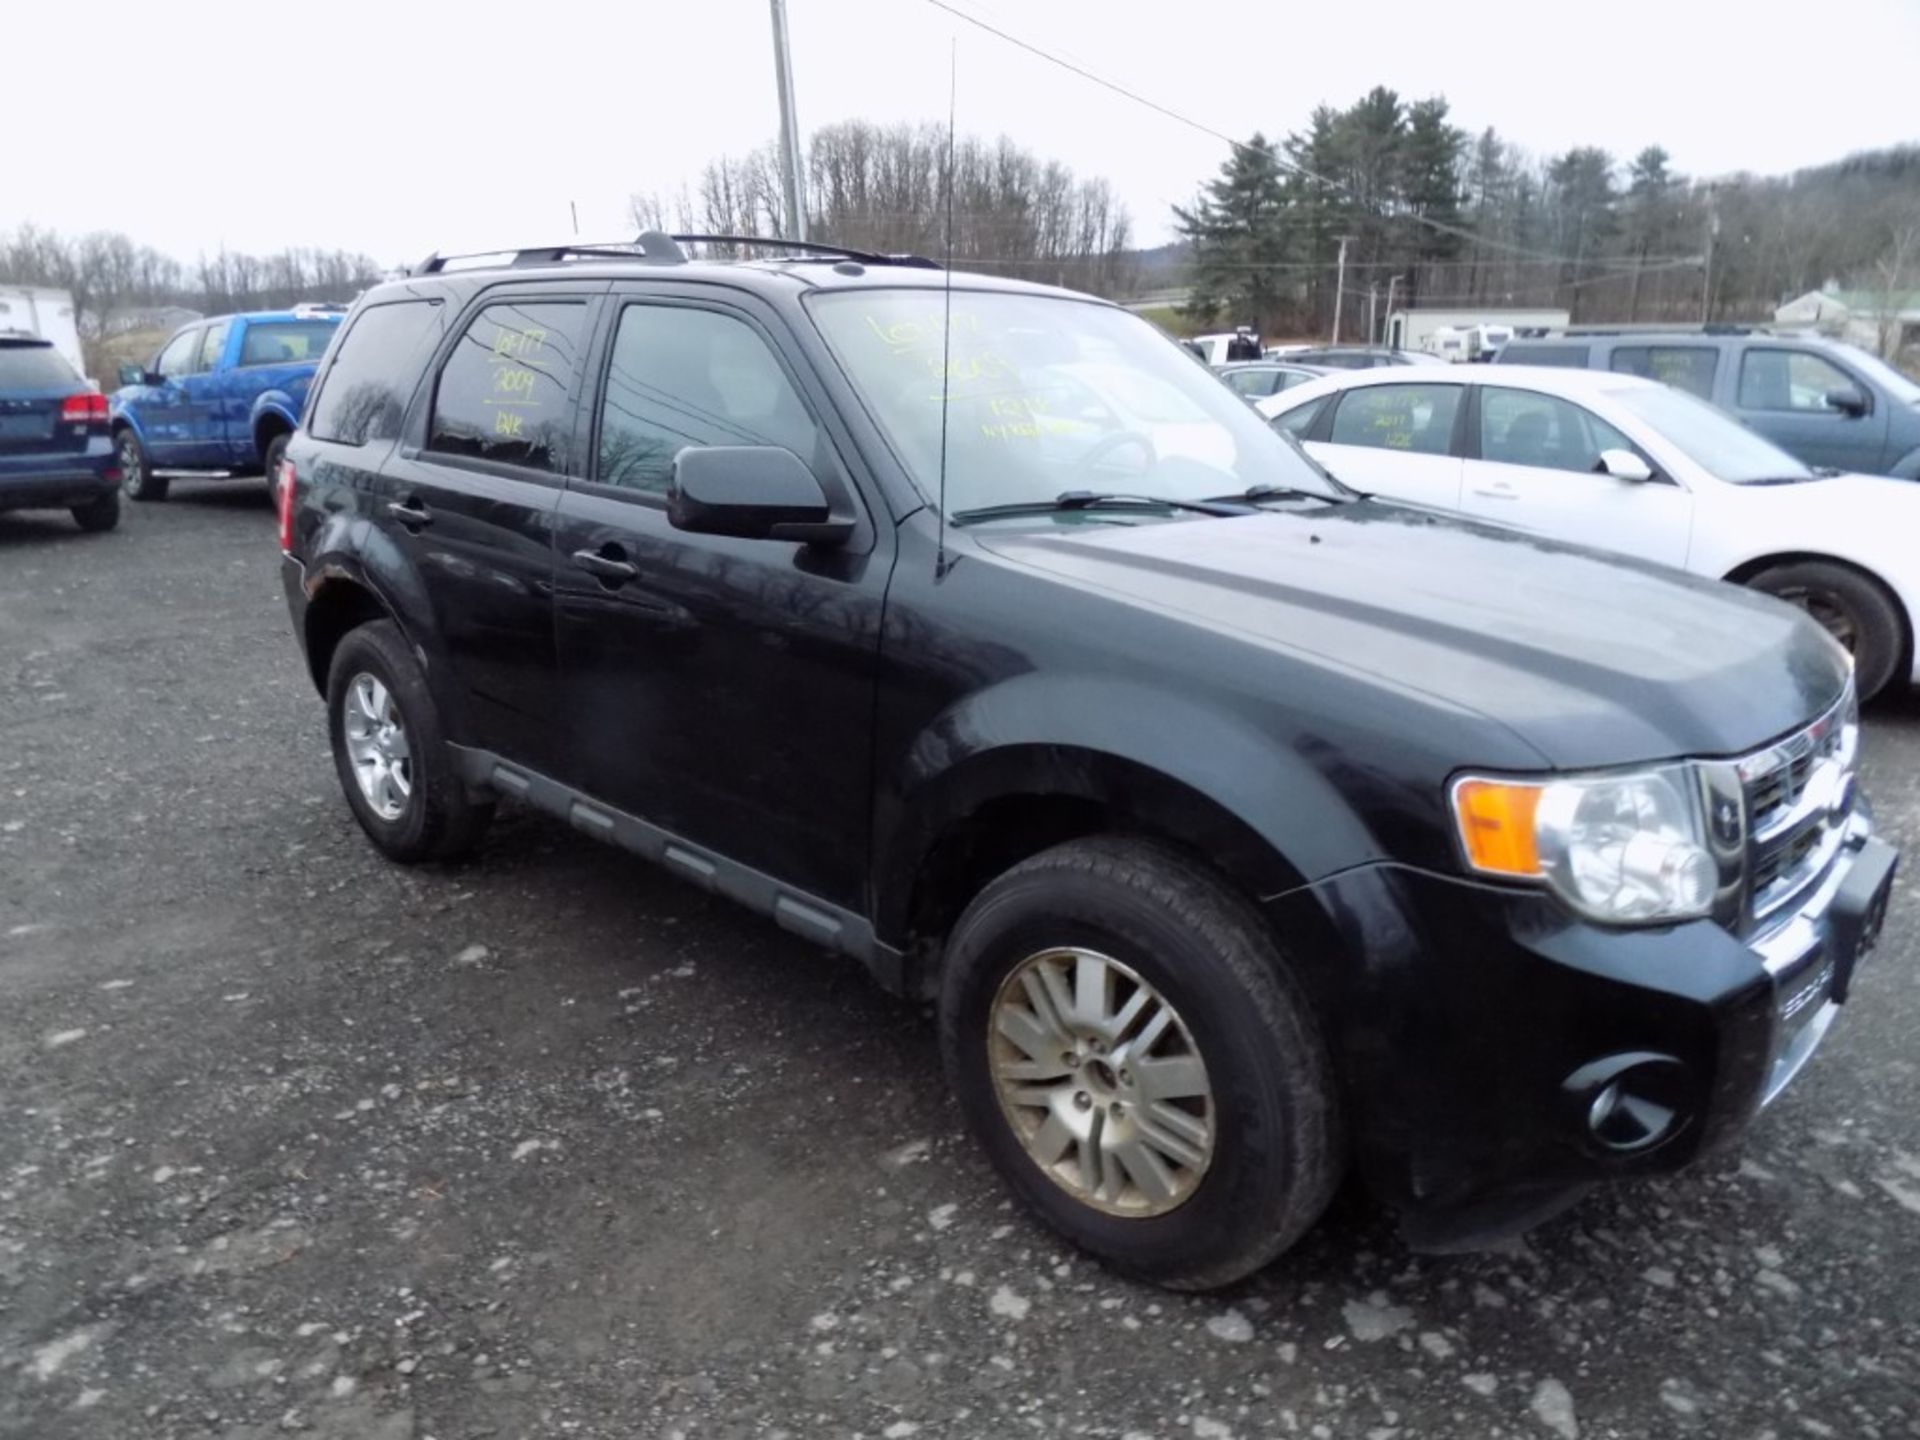 2009 Ford Escape Limited, 4x4, Black, Leather, Sunroof, 121,531 Miles, VIN#: 1FMCU94G09KC66421, - Image 4 of 12